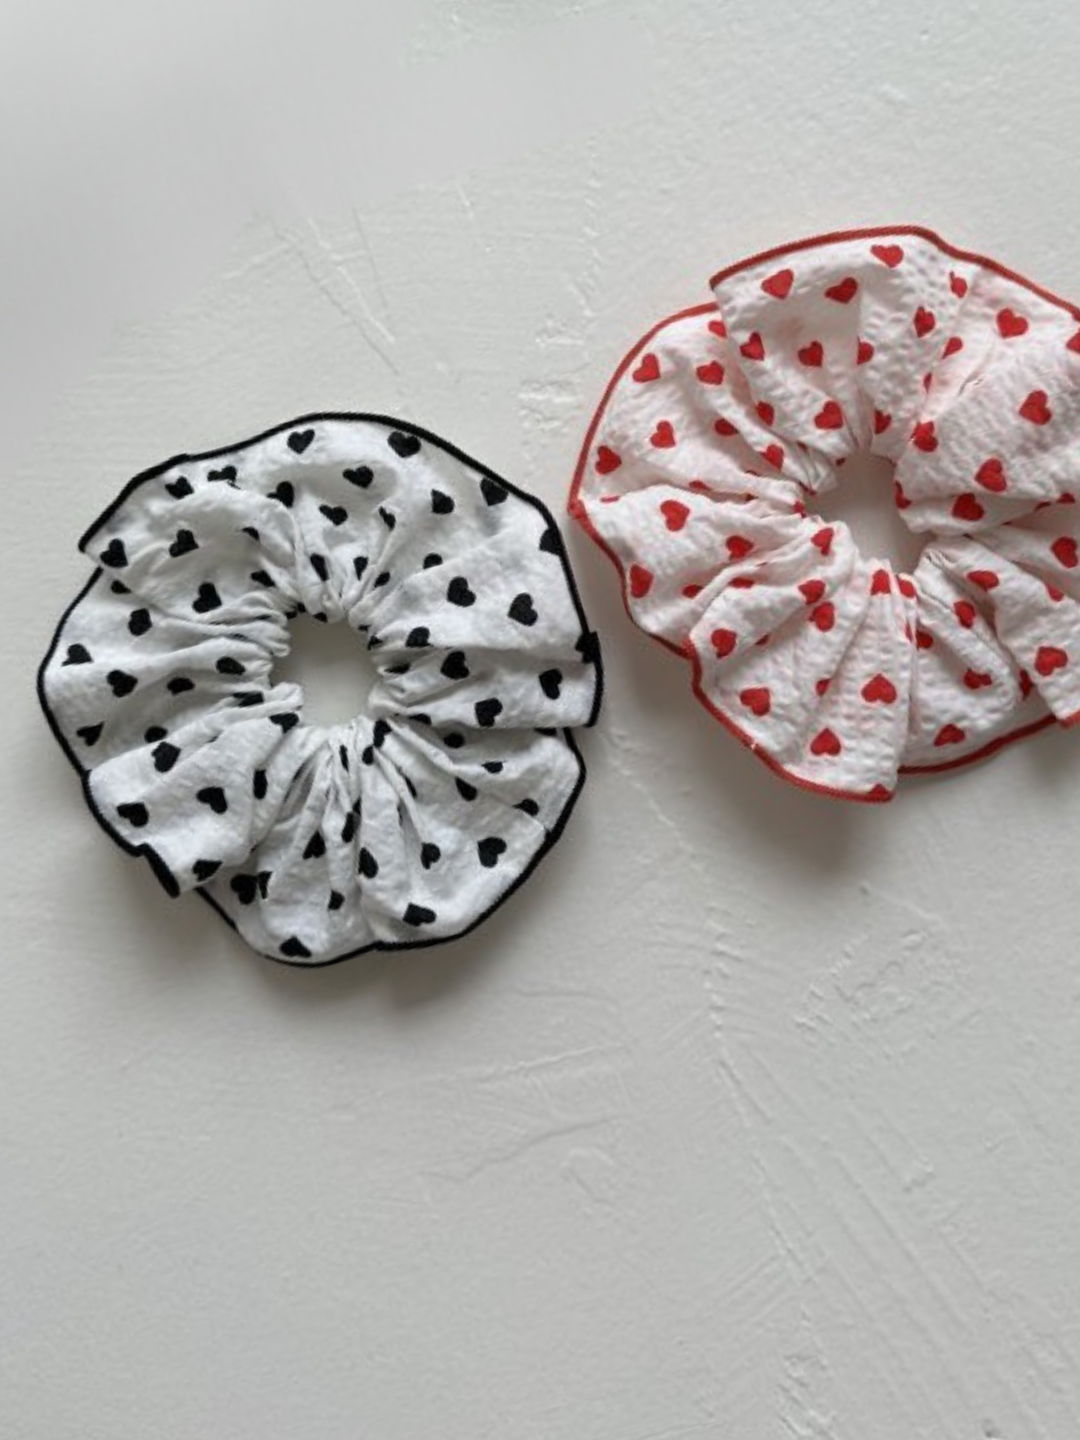 Two white hair scrunchies on a textured white surface, one is printed with small black hearts, and one with red hearts..